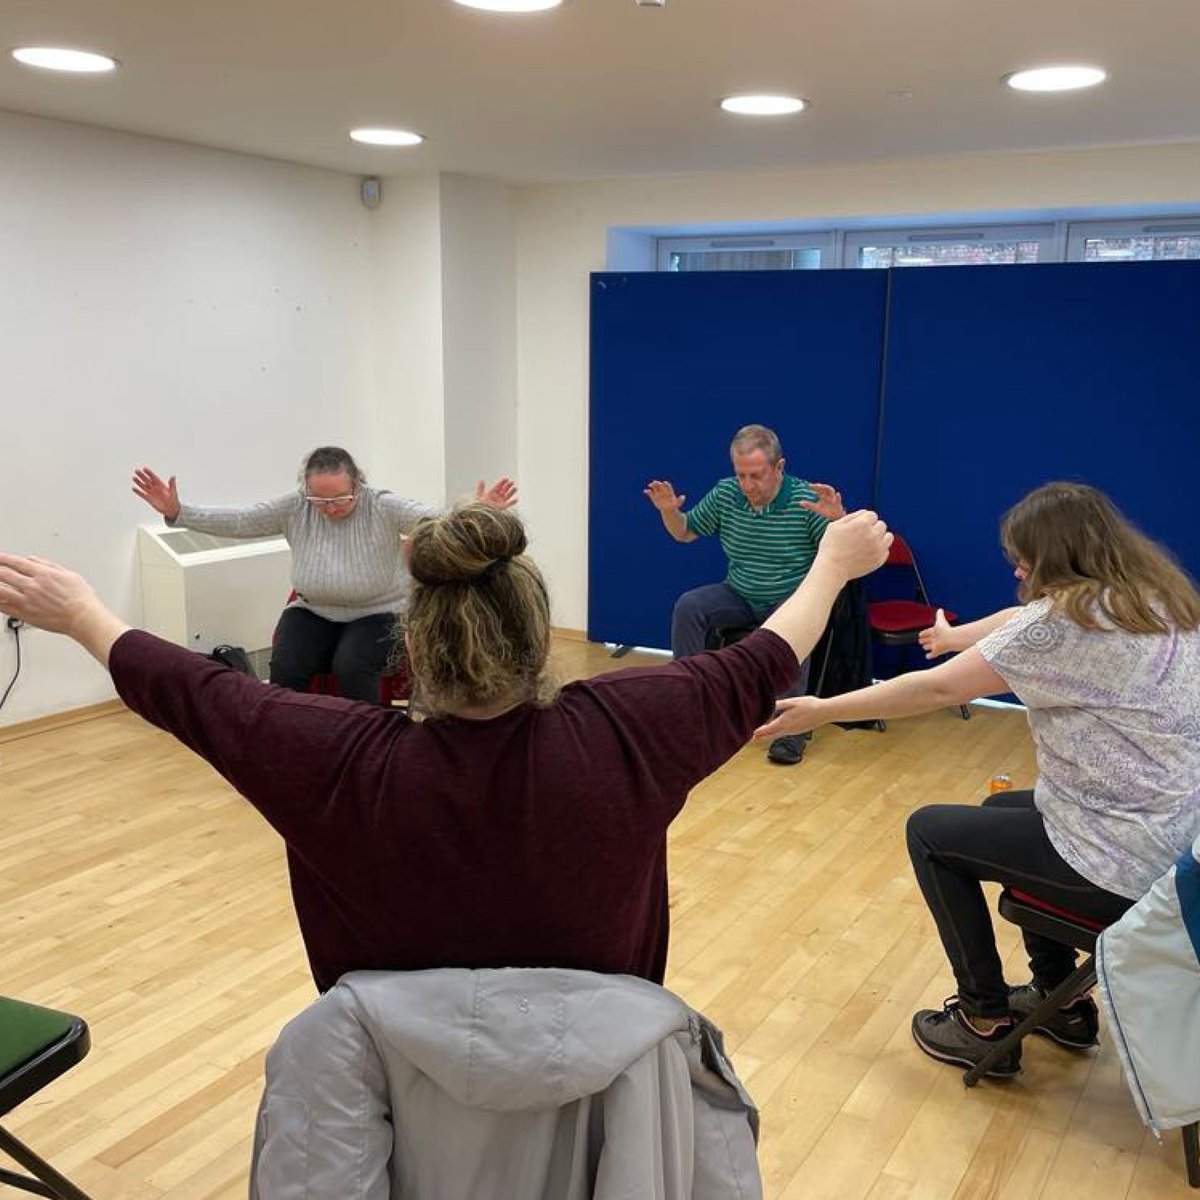 Our Dumfries & Galloway team is always finding new activities to promote movement and mental wellbeing. You can see the joy on their faces, no matter the activity! 😃 🔗 buff.ly/3ZTLpby What new activities have you tried for your mental health? Share below 💭